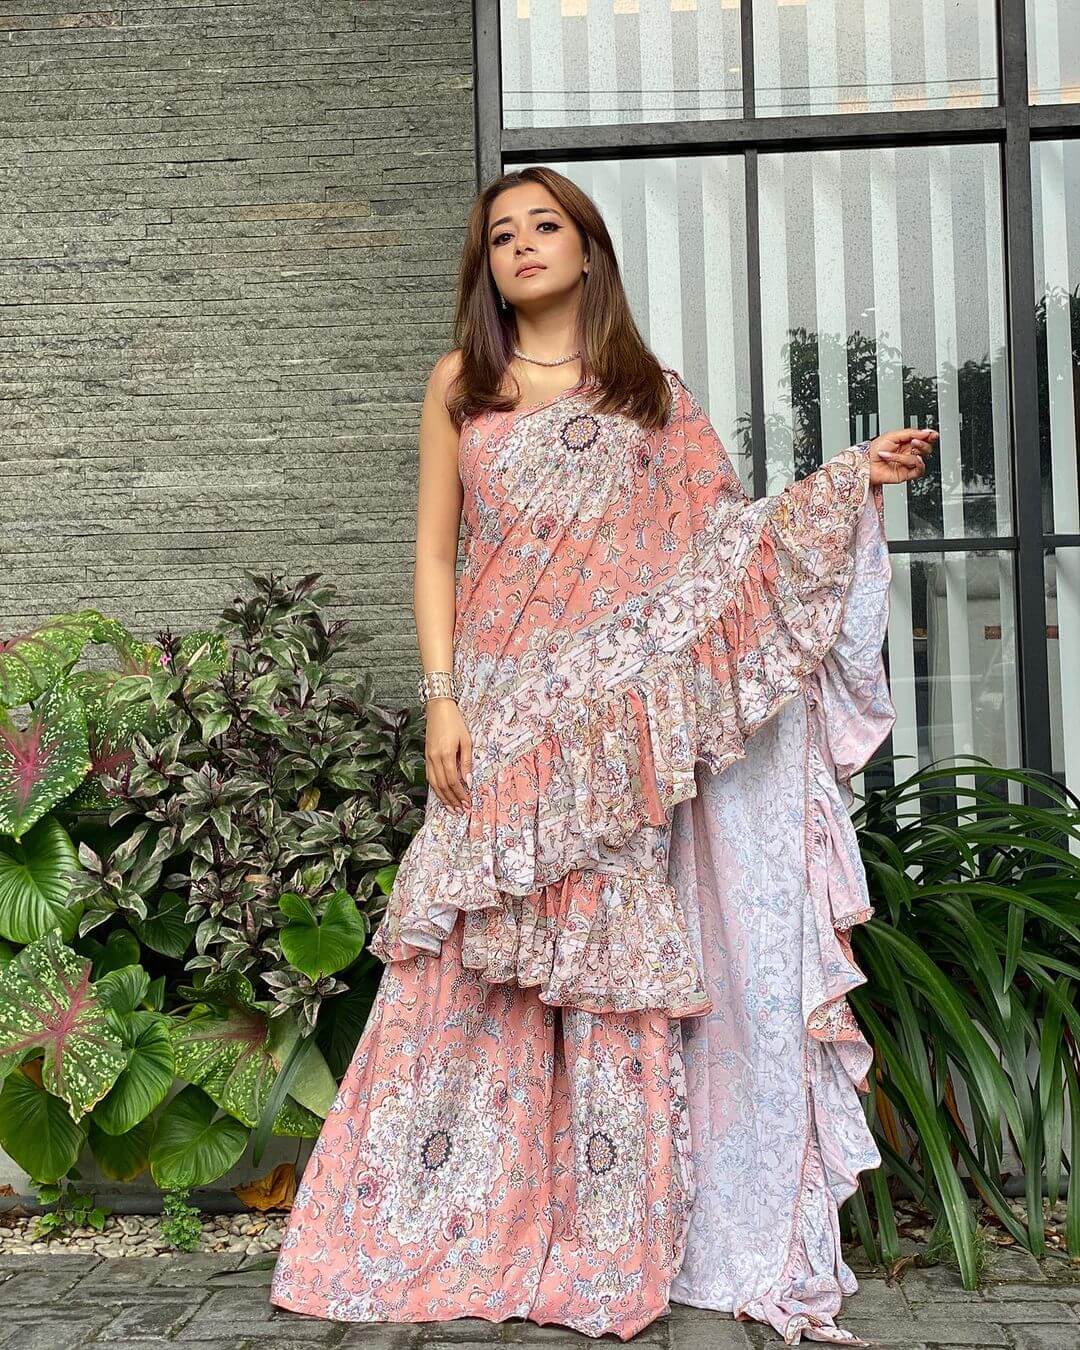 Tina Datta is Exuding Modern Femininity in This Floral Saree